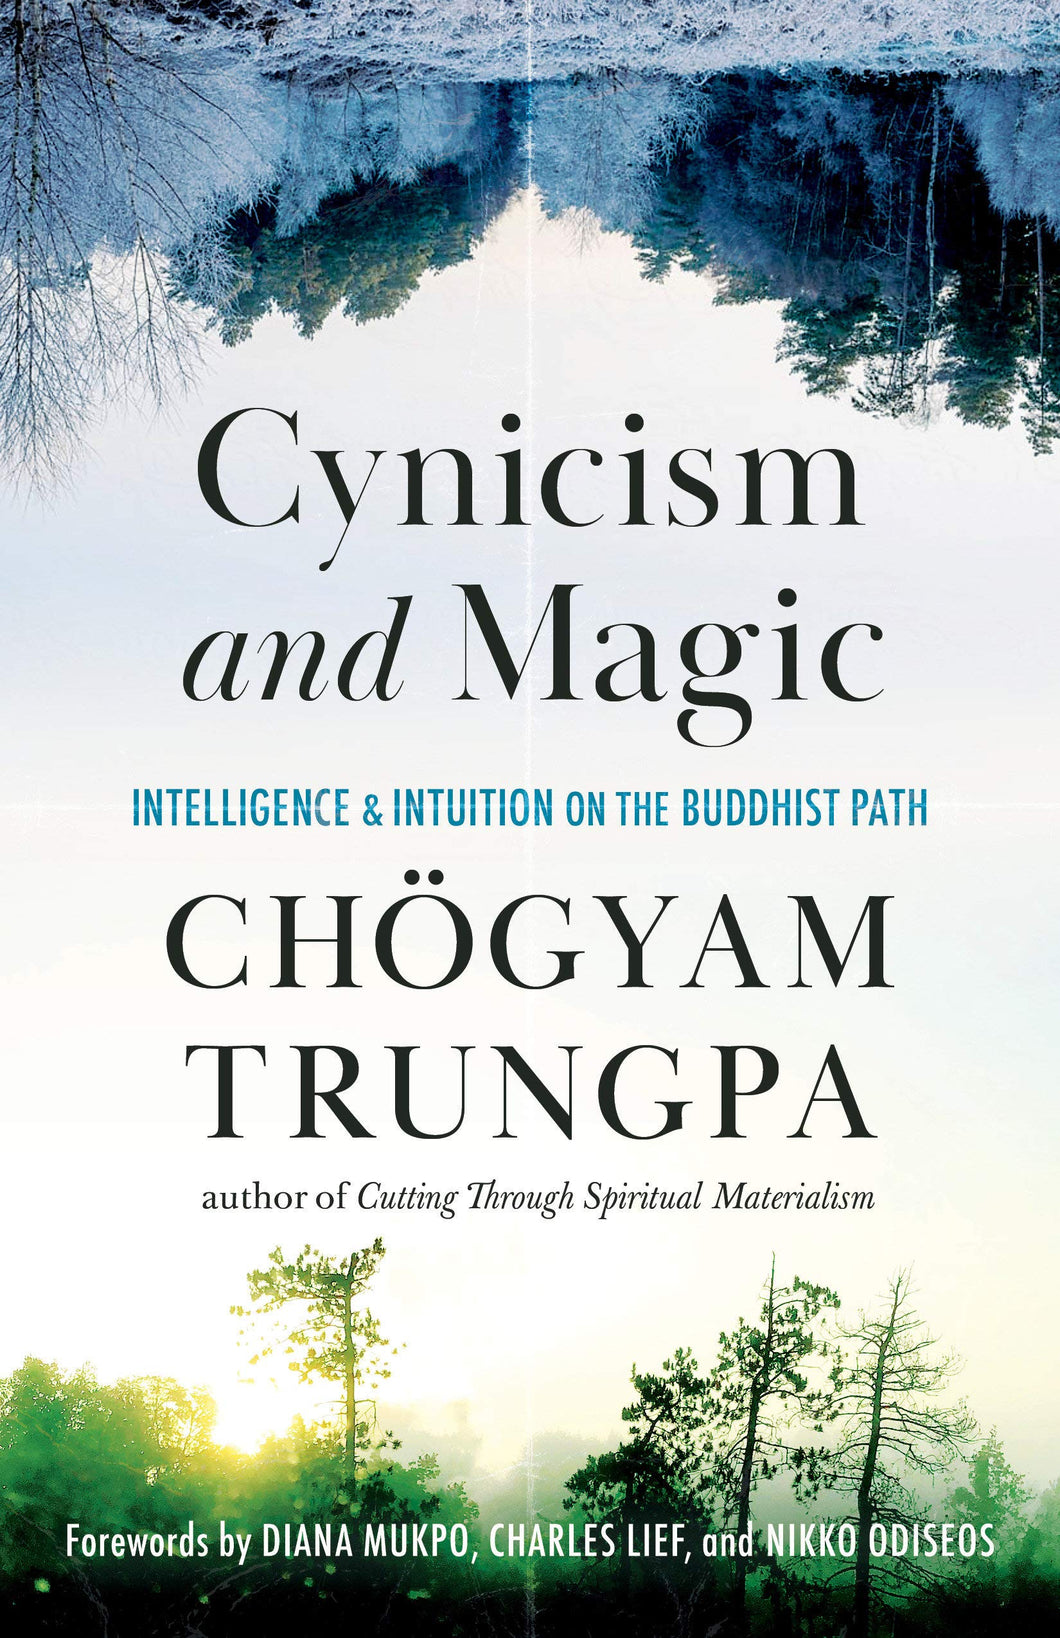 Cynicism and Magic: Intelligence and Intuition on the Buddhist Path